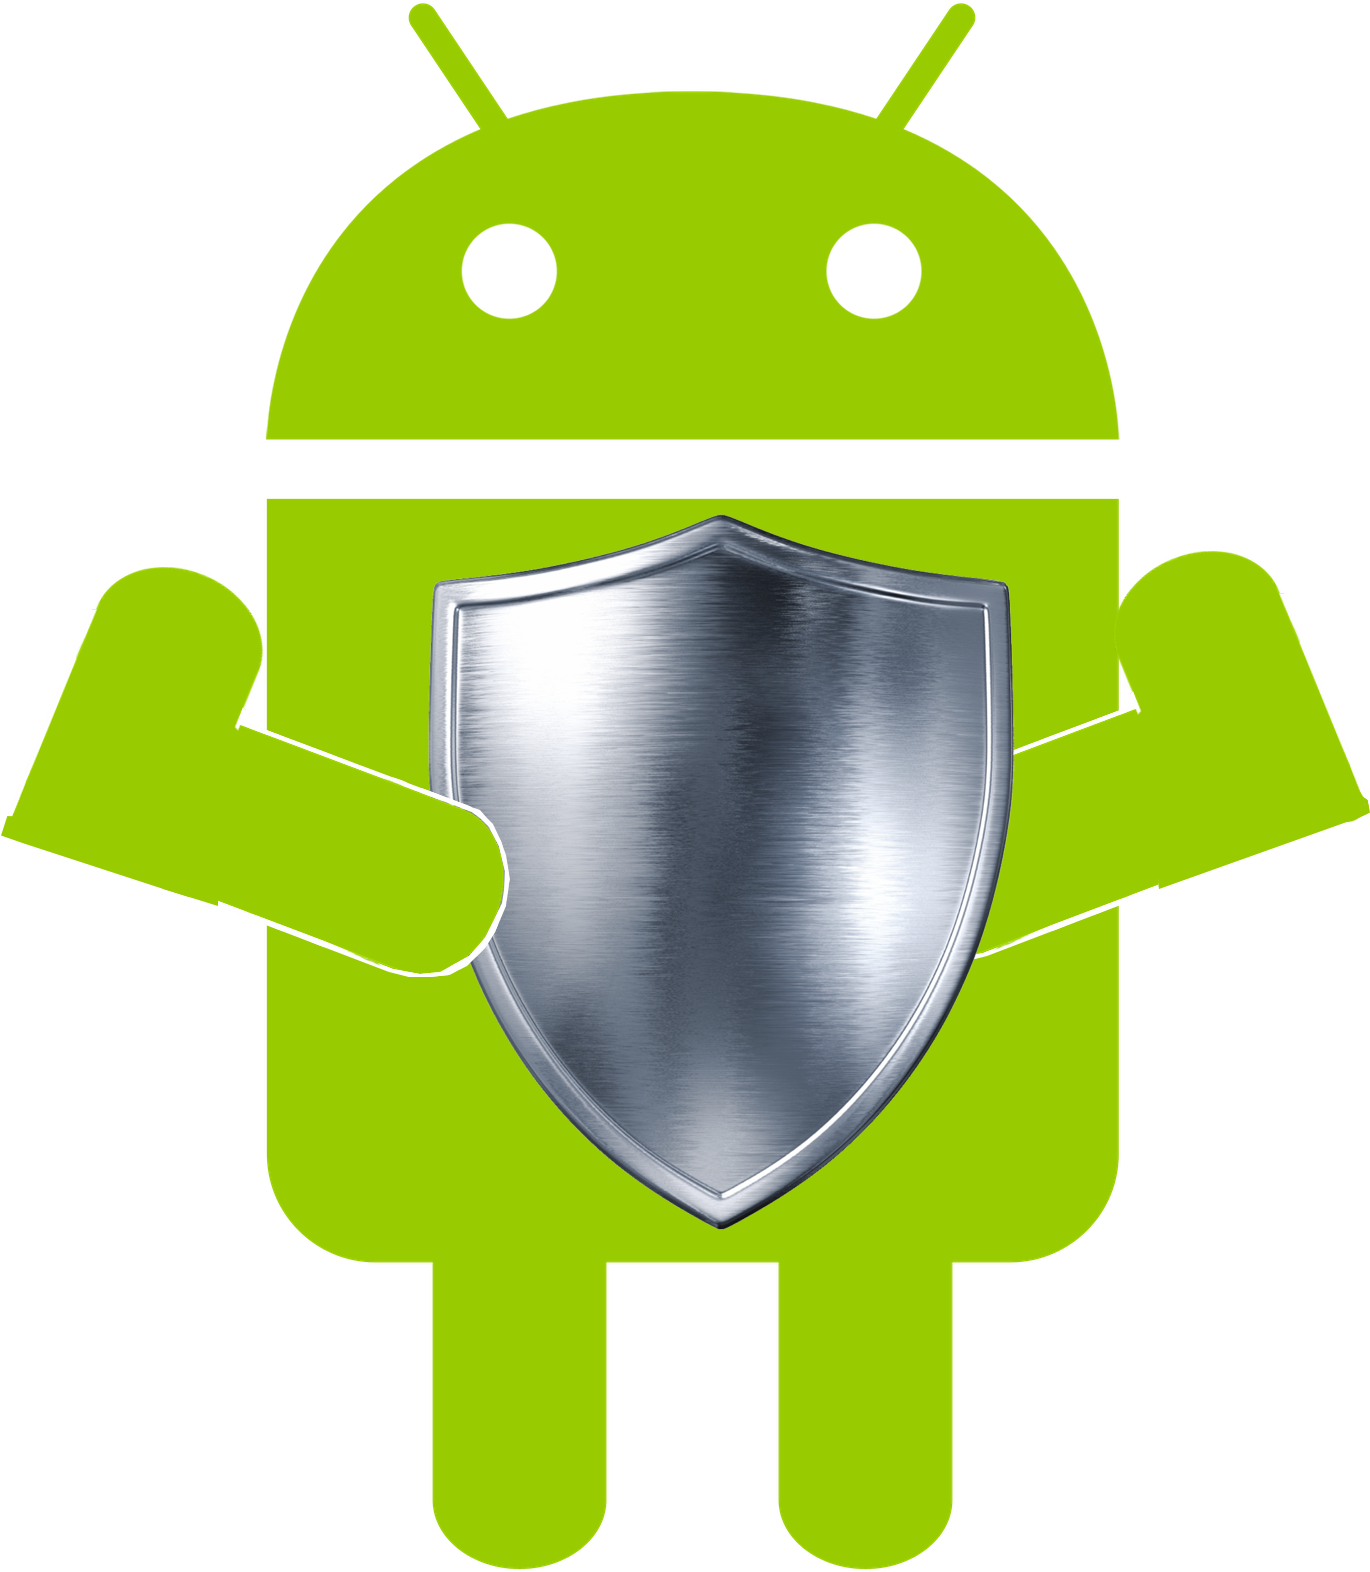 How To Avoid Virus And Malware On Android - Android Battery Low Logo (1600x1600)